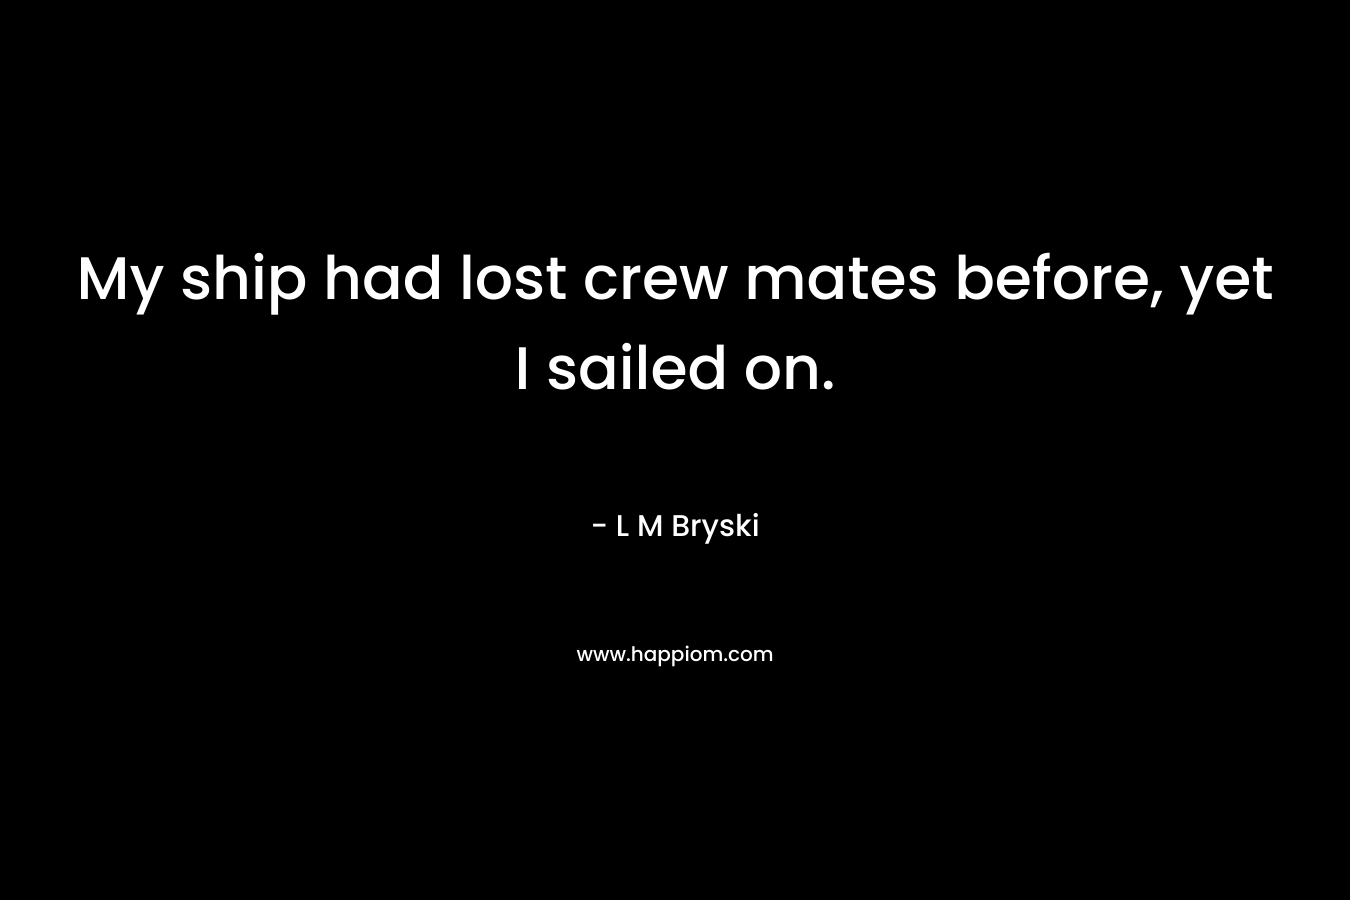 My ship had lost crew mates before, yet I sailed on.